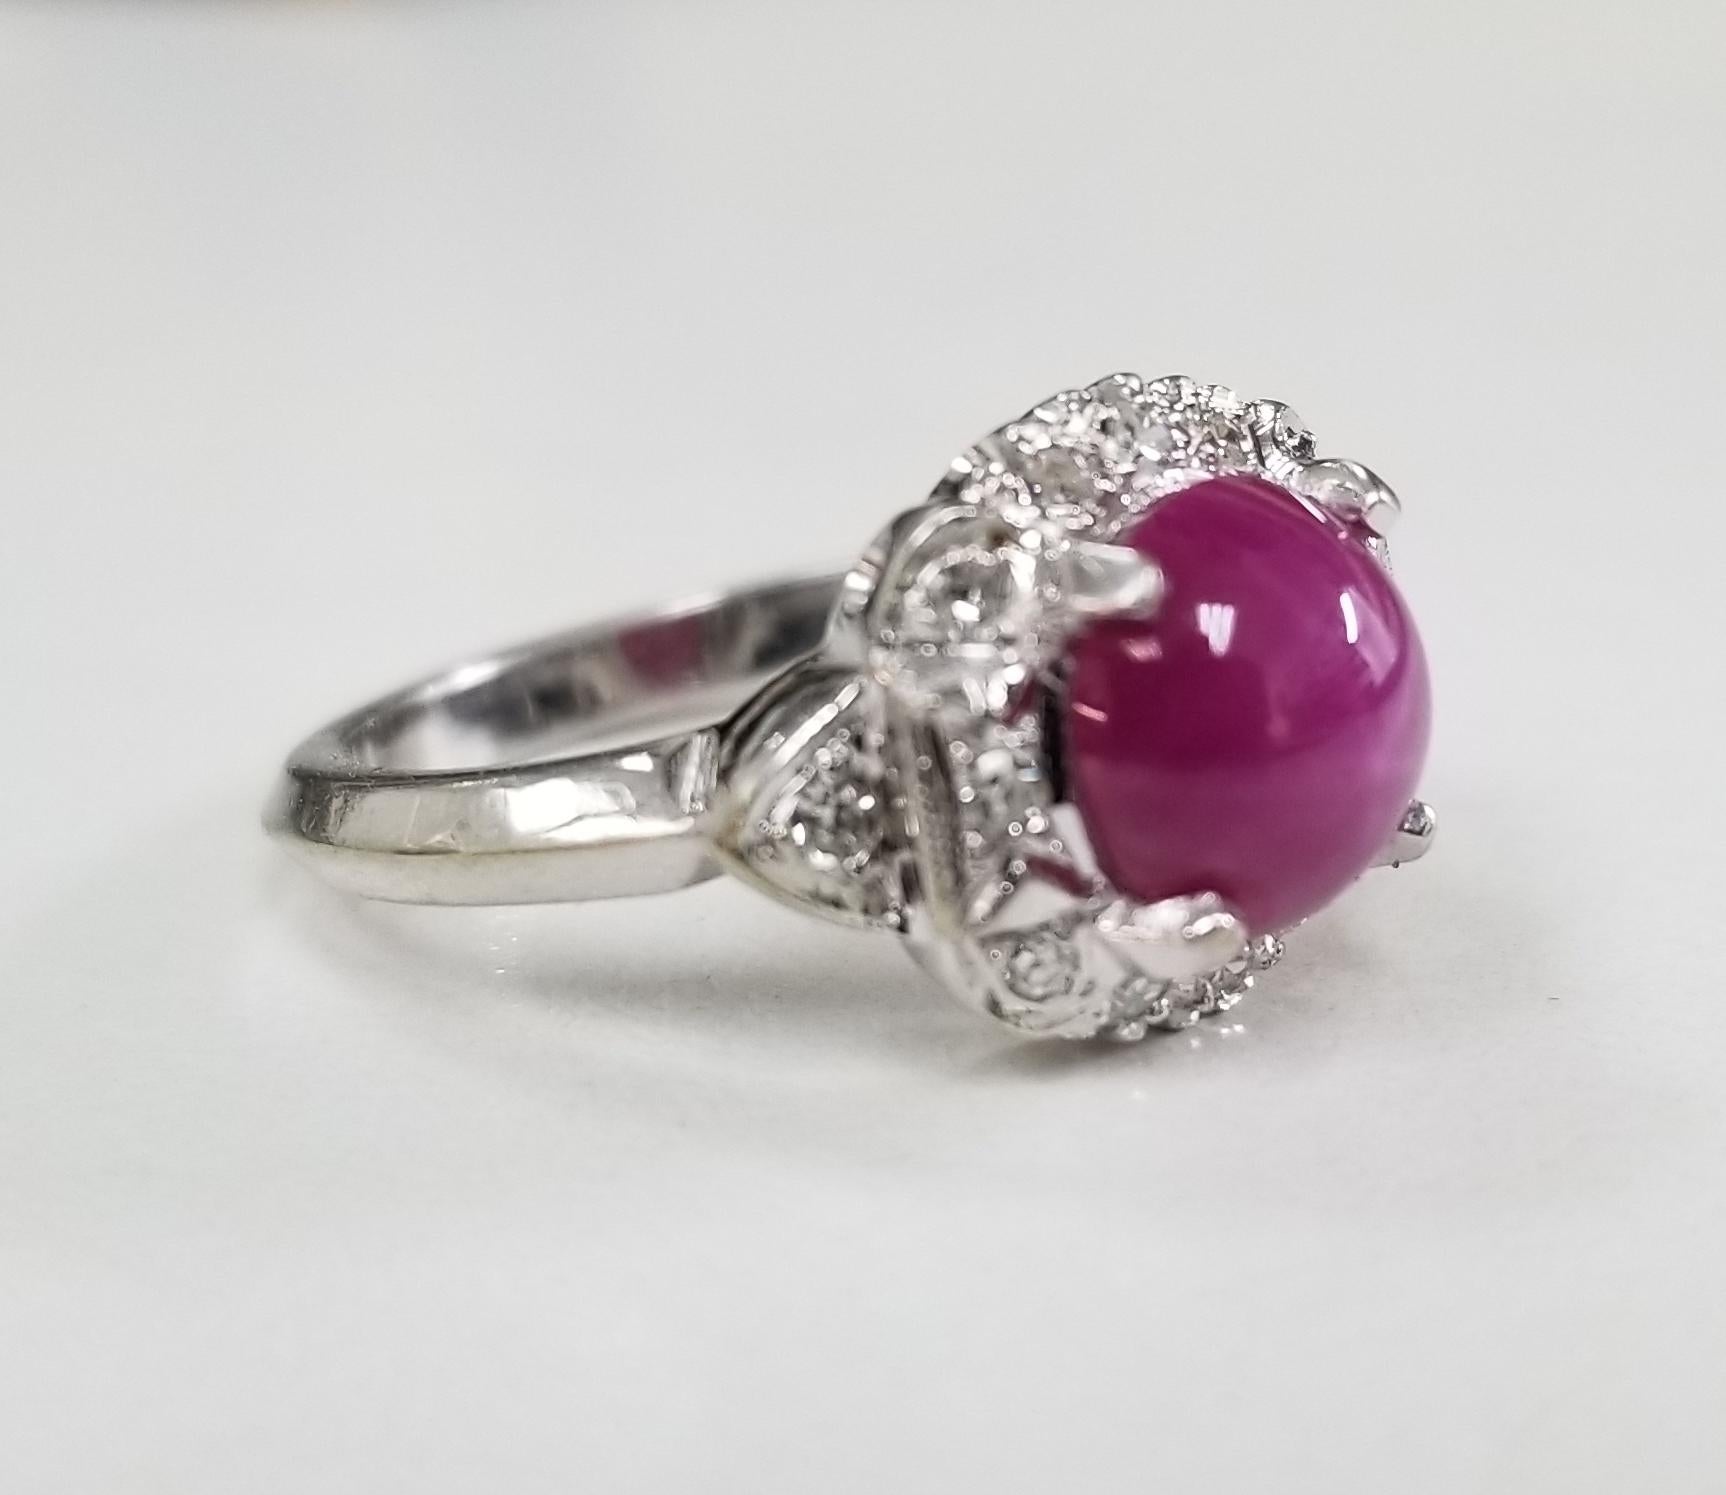  This is a 14k white gold ring with Pink Linde Star Sapphire in center and approximately 2.50ct diamonds.  The ring is currently 6 in US size, but I can get it resized a bit. 
Specifications:
    main stone: Pink Linde Star Sapphire 2.50CT
   